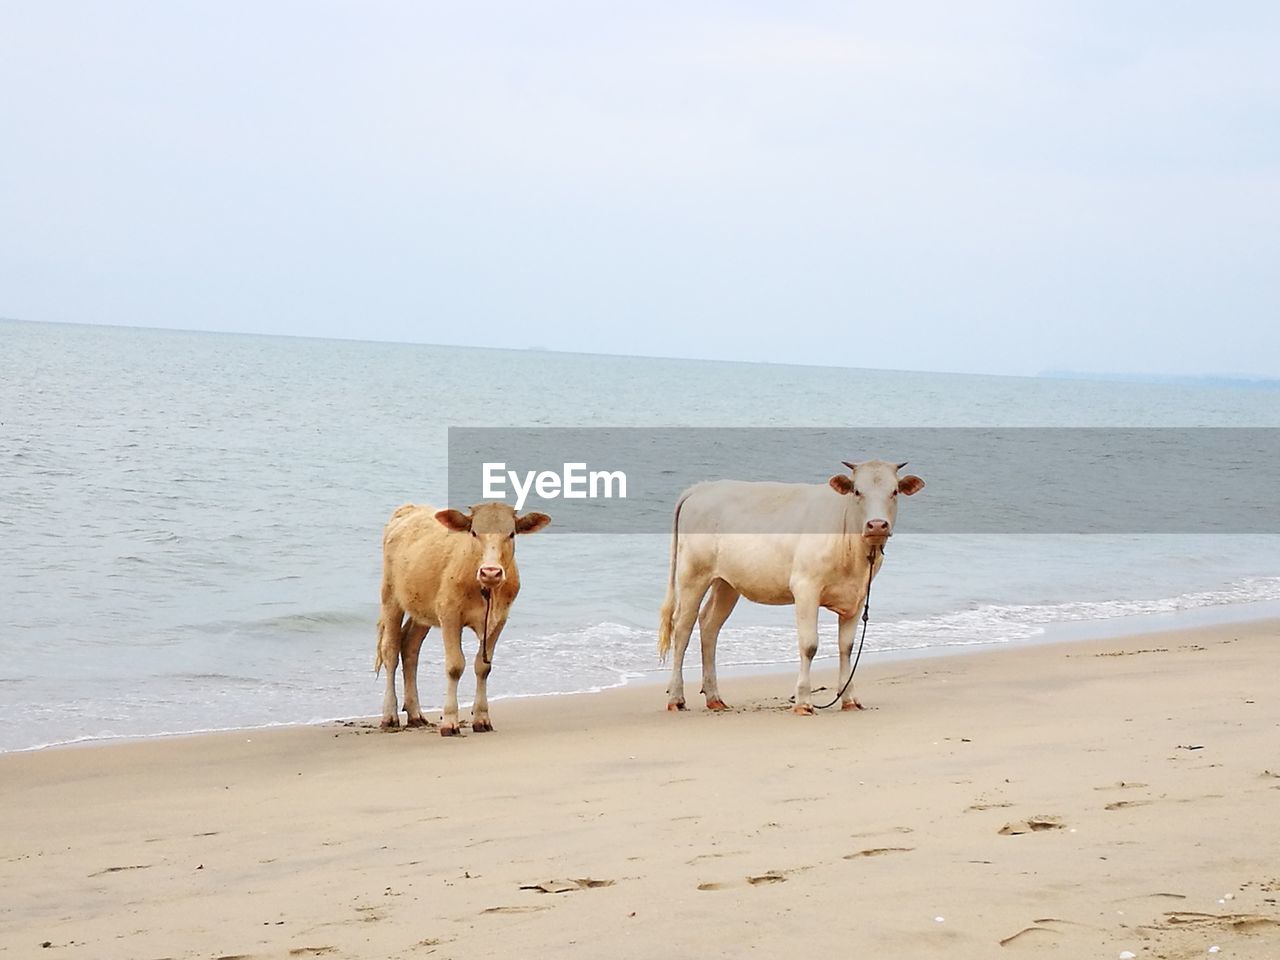 Cows standing on shore at beach